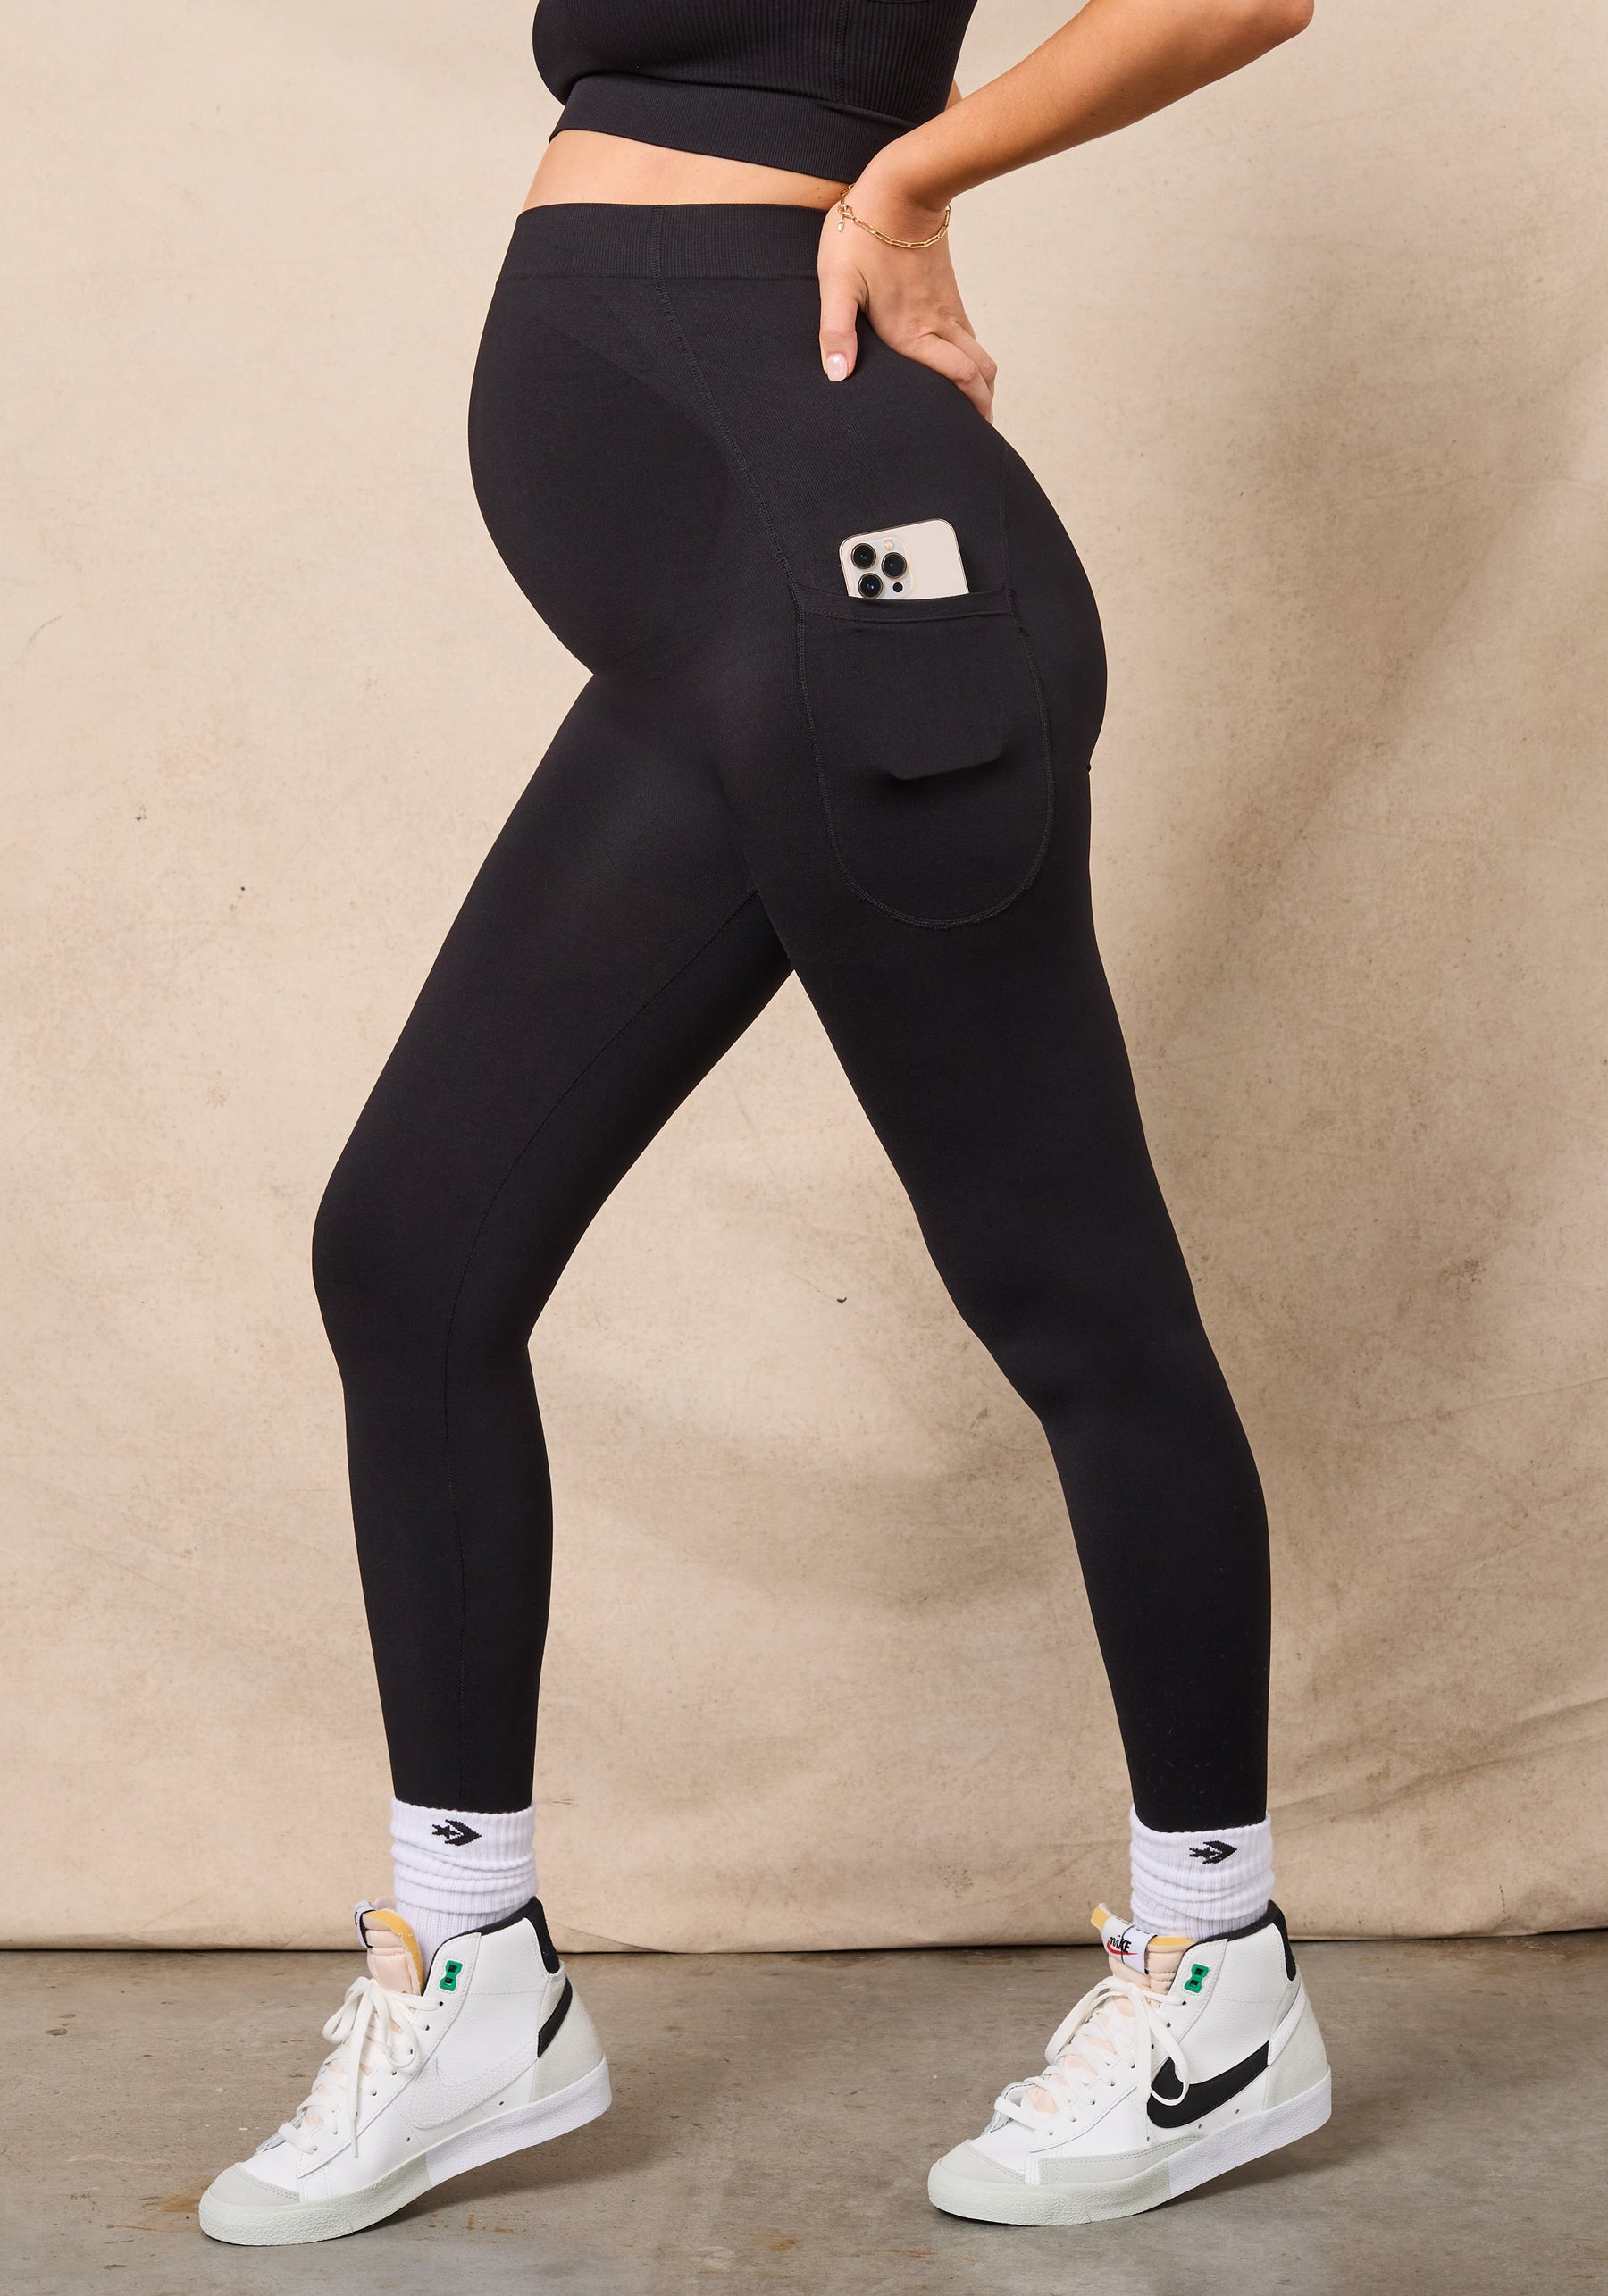 Everything to Know About Nike Maternity Leggings.